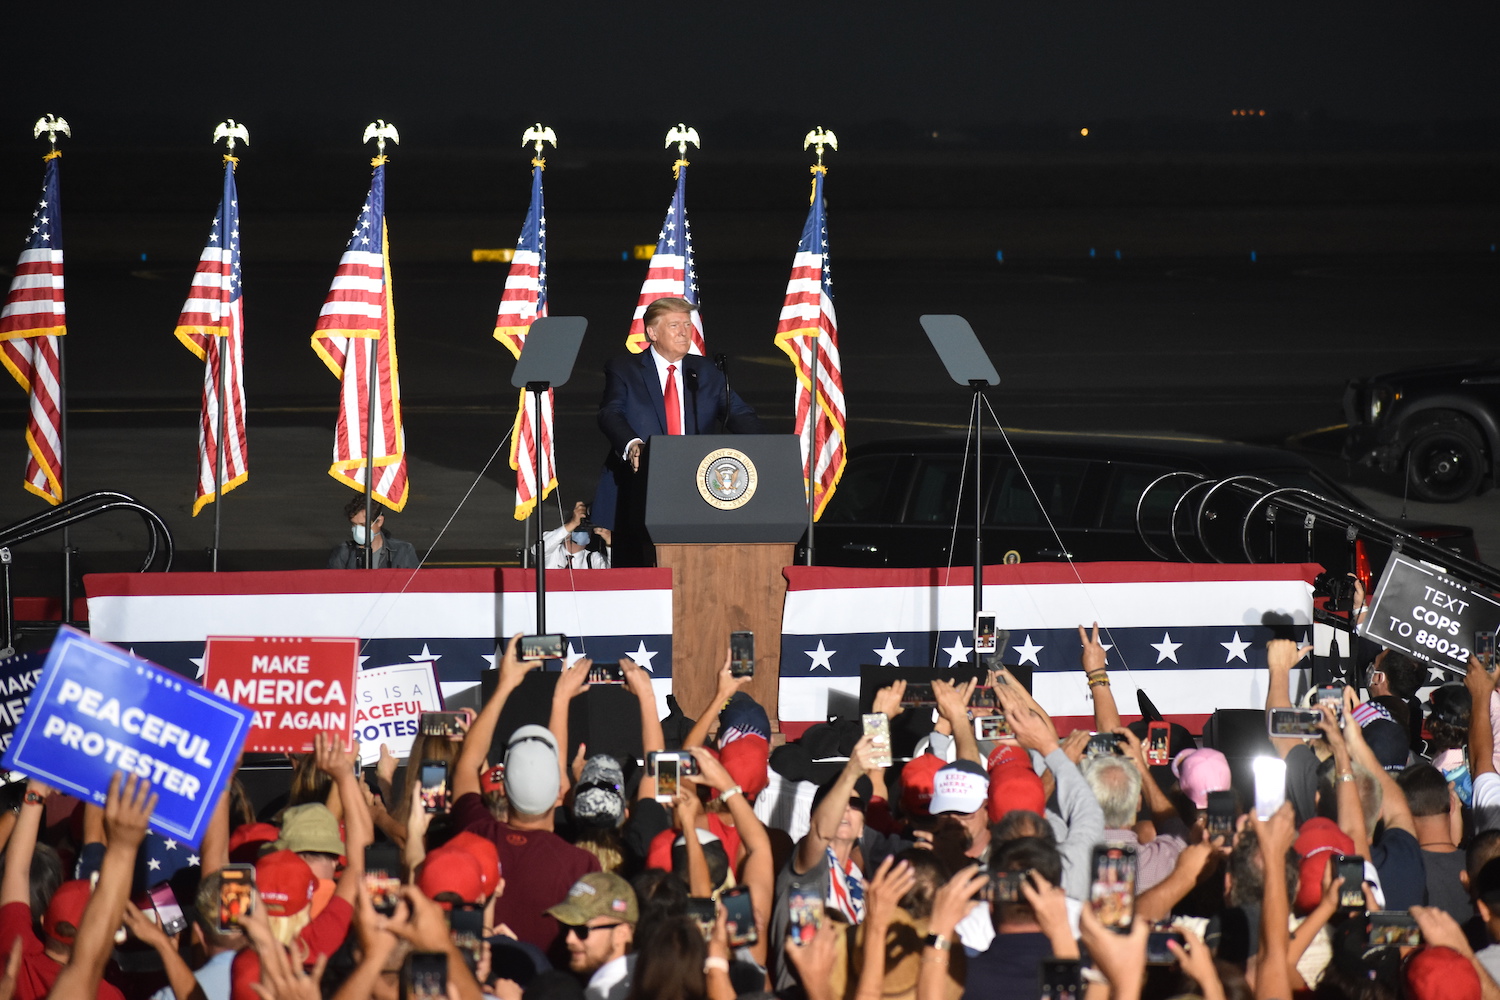 President Donald Trump stands behind a podium in front of four U.S. flags on a platform in front of attendees at the Minden-Tahoe Airport in Nevada.